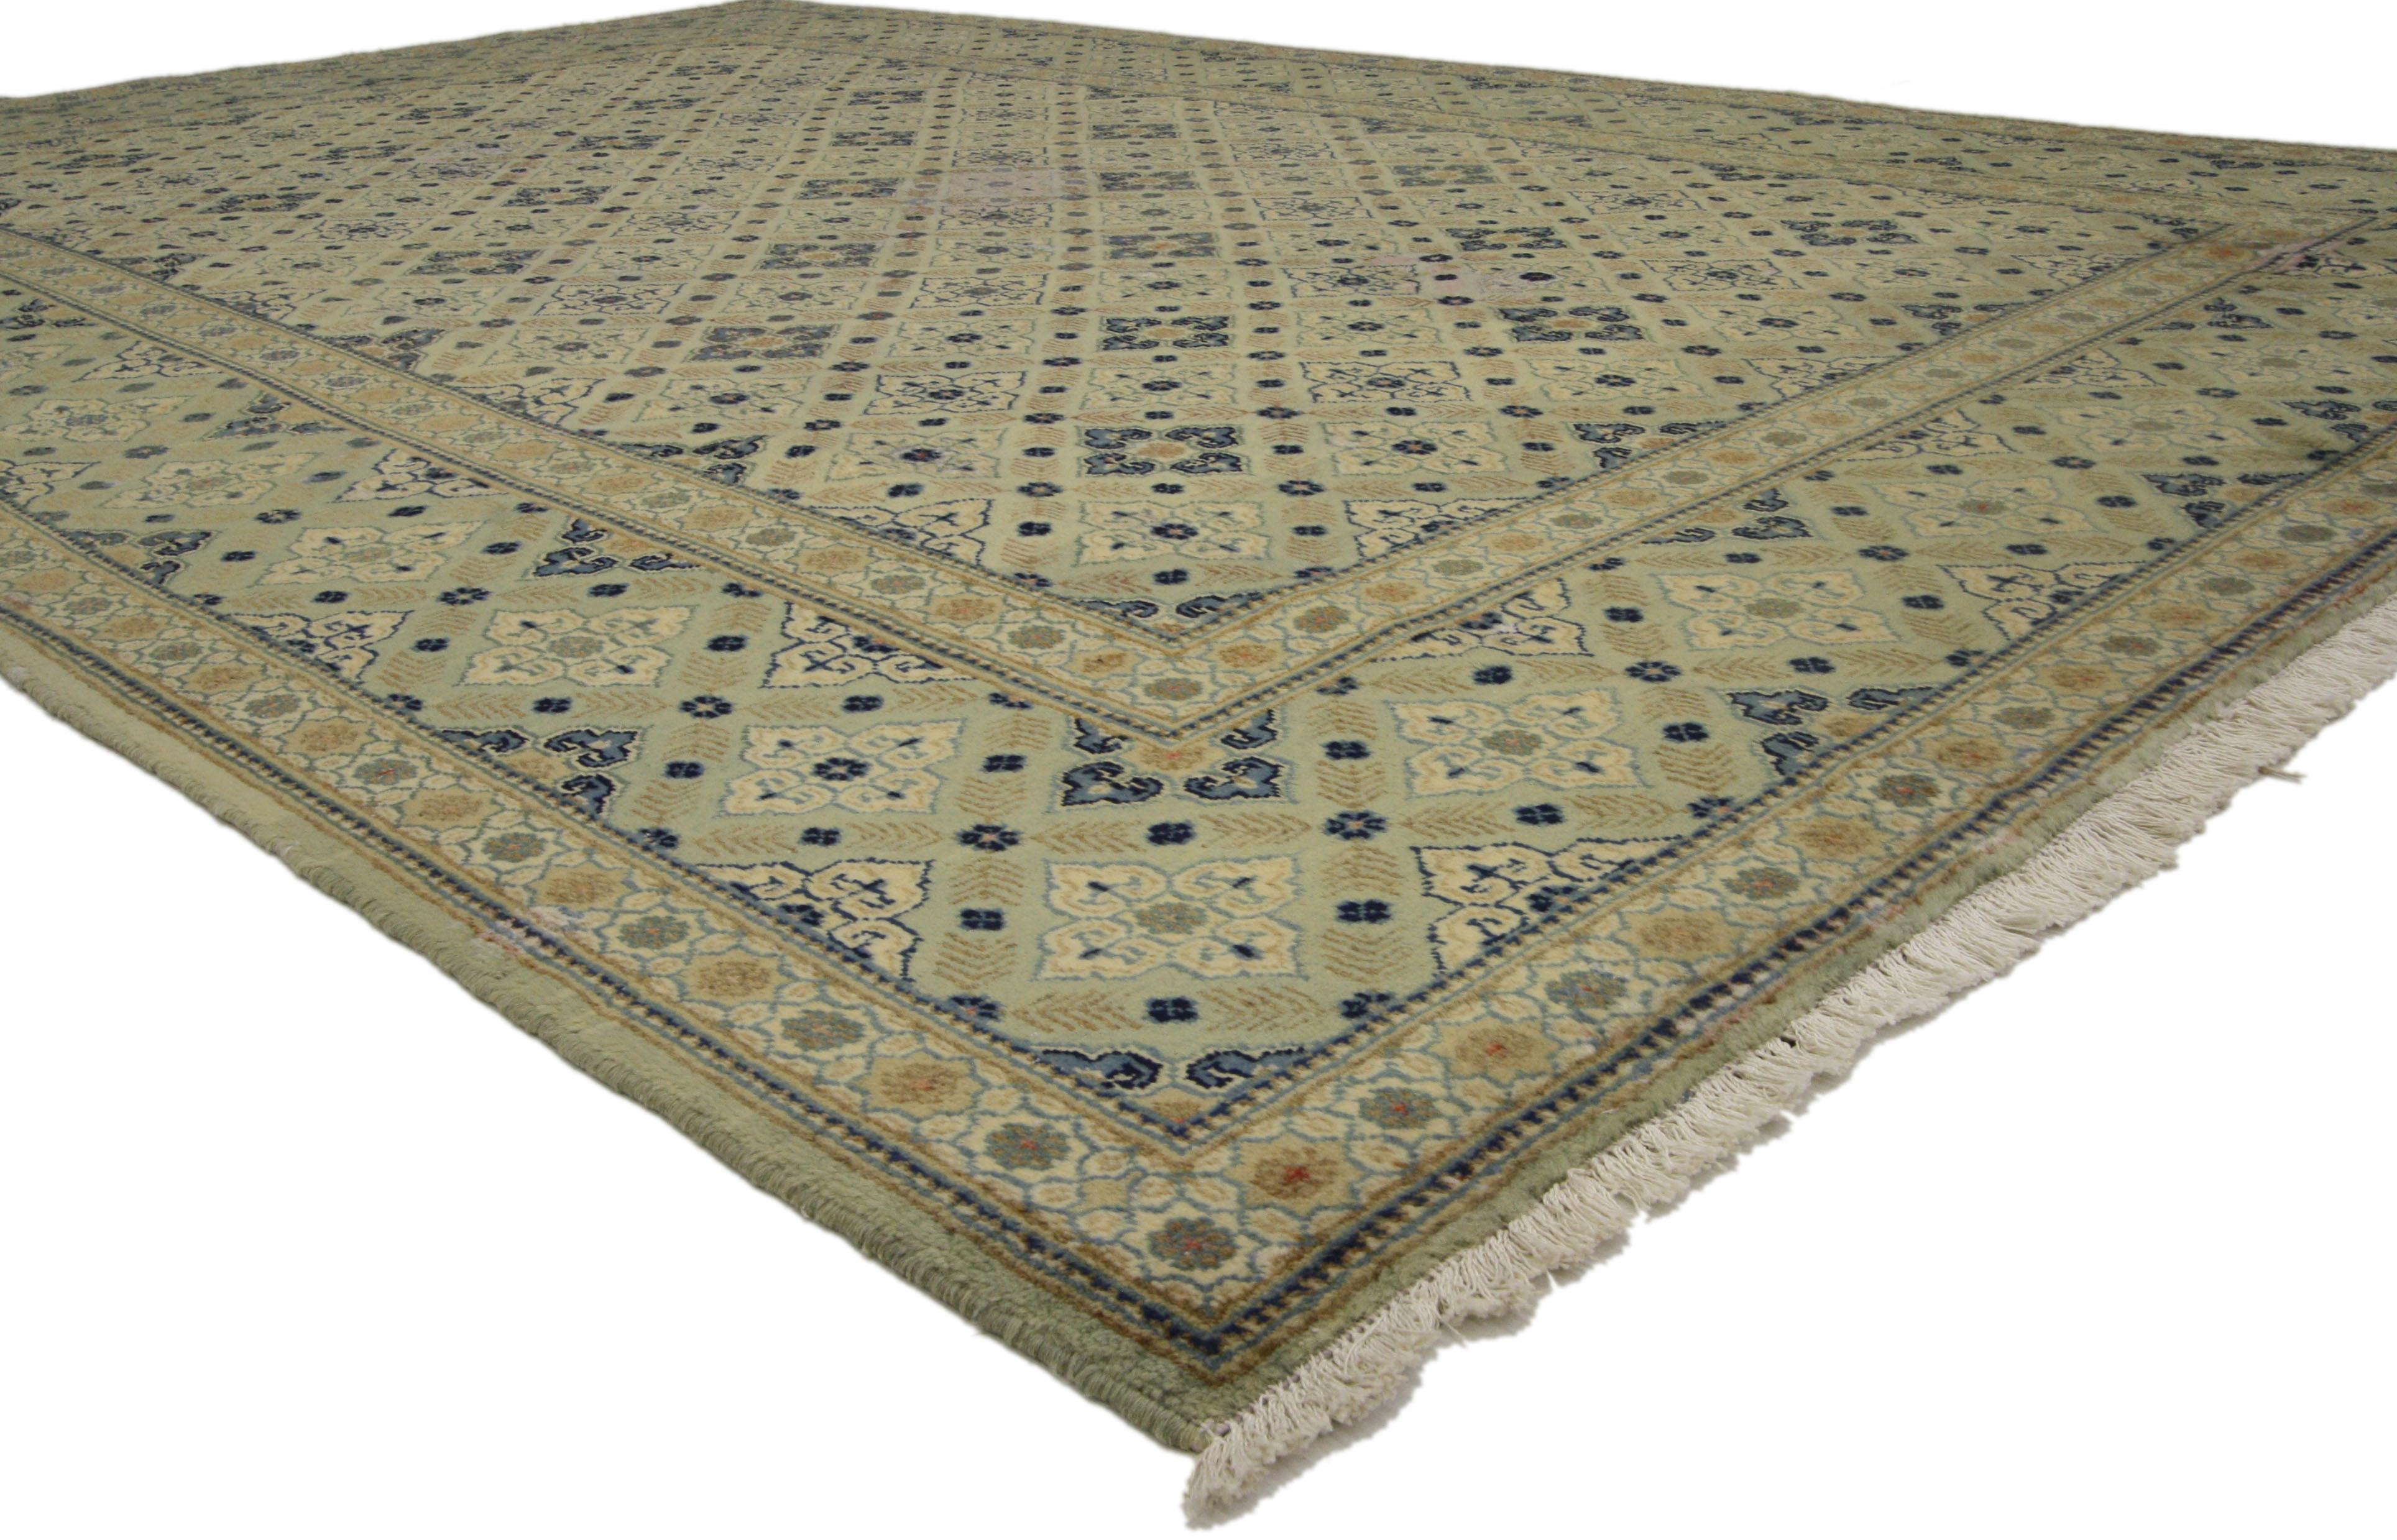 76518 Vintage Persian Kashan Area rug with Swedish Cottage Gustavian style. Elegant and captivating, this hand knotted wool vintage Persian Kashan area rug features an all-over geometric pattern composed of repeating quatrefoil and trefoil motifs in